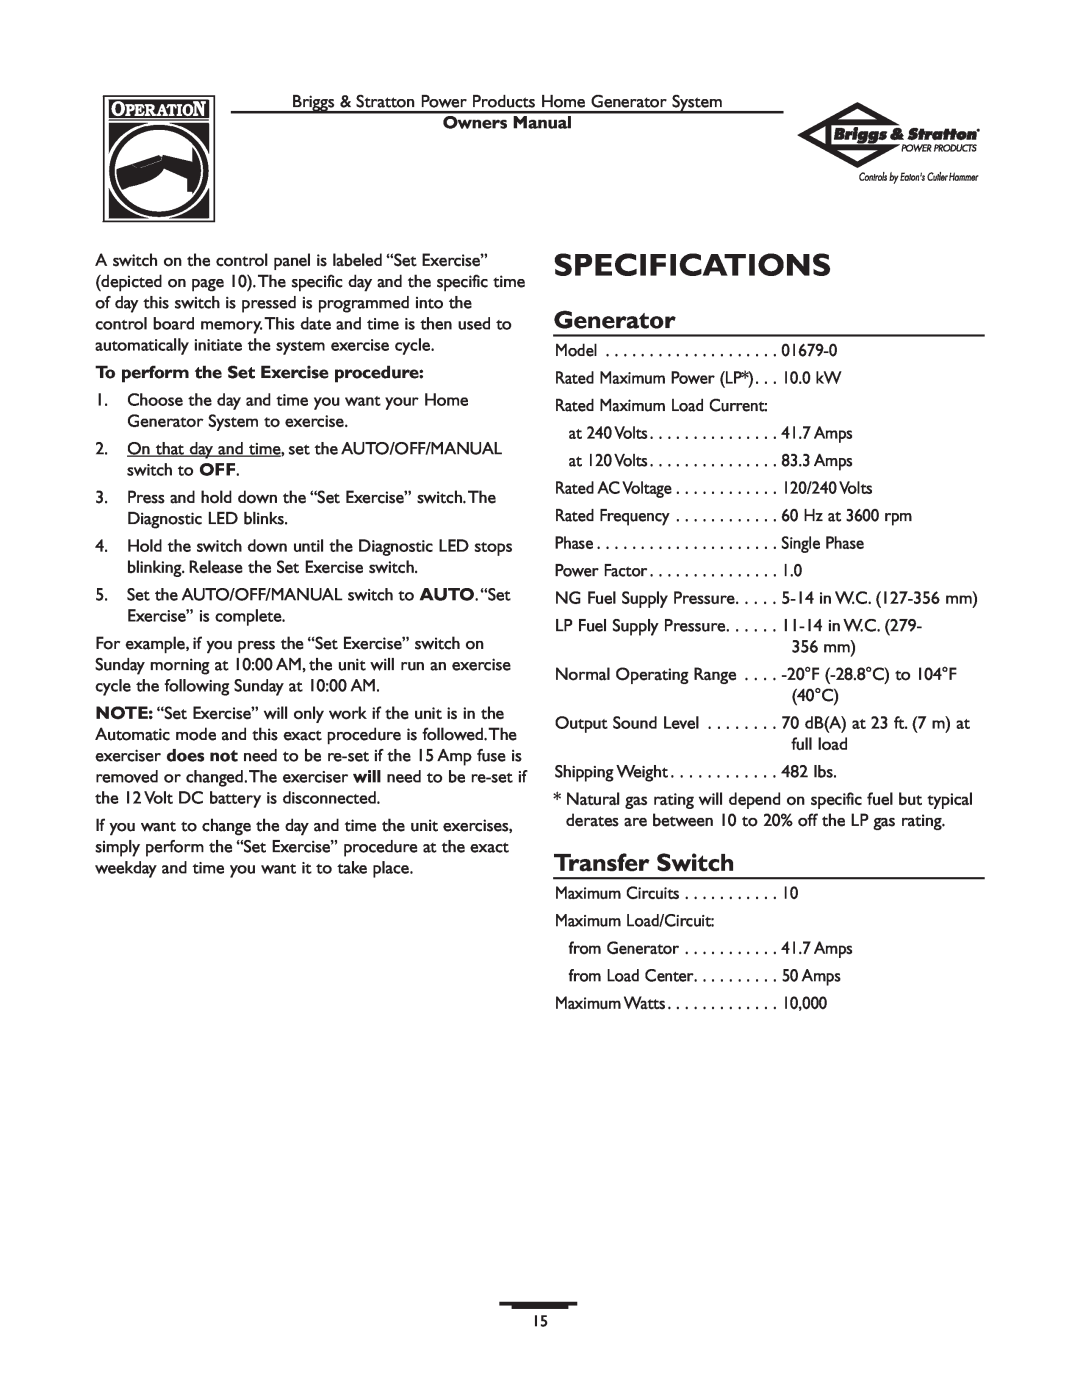 Briggs & Stratton 190839GS owner manual Specifications, Generator, Transfer Switch, Owners Manual 